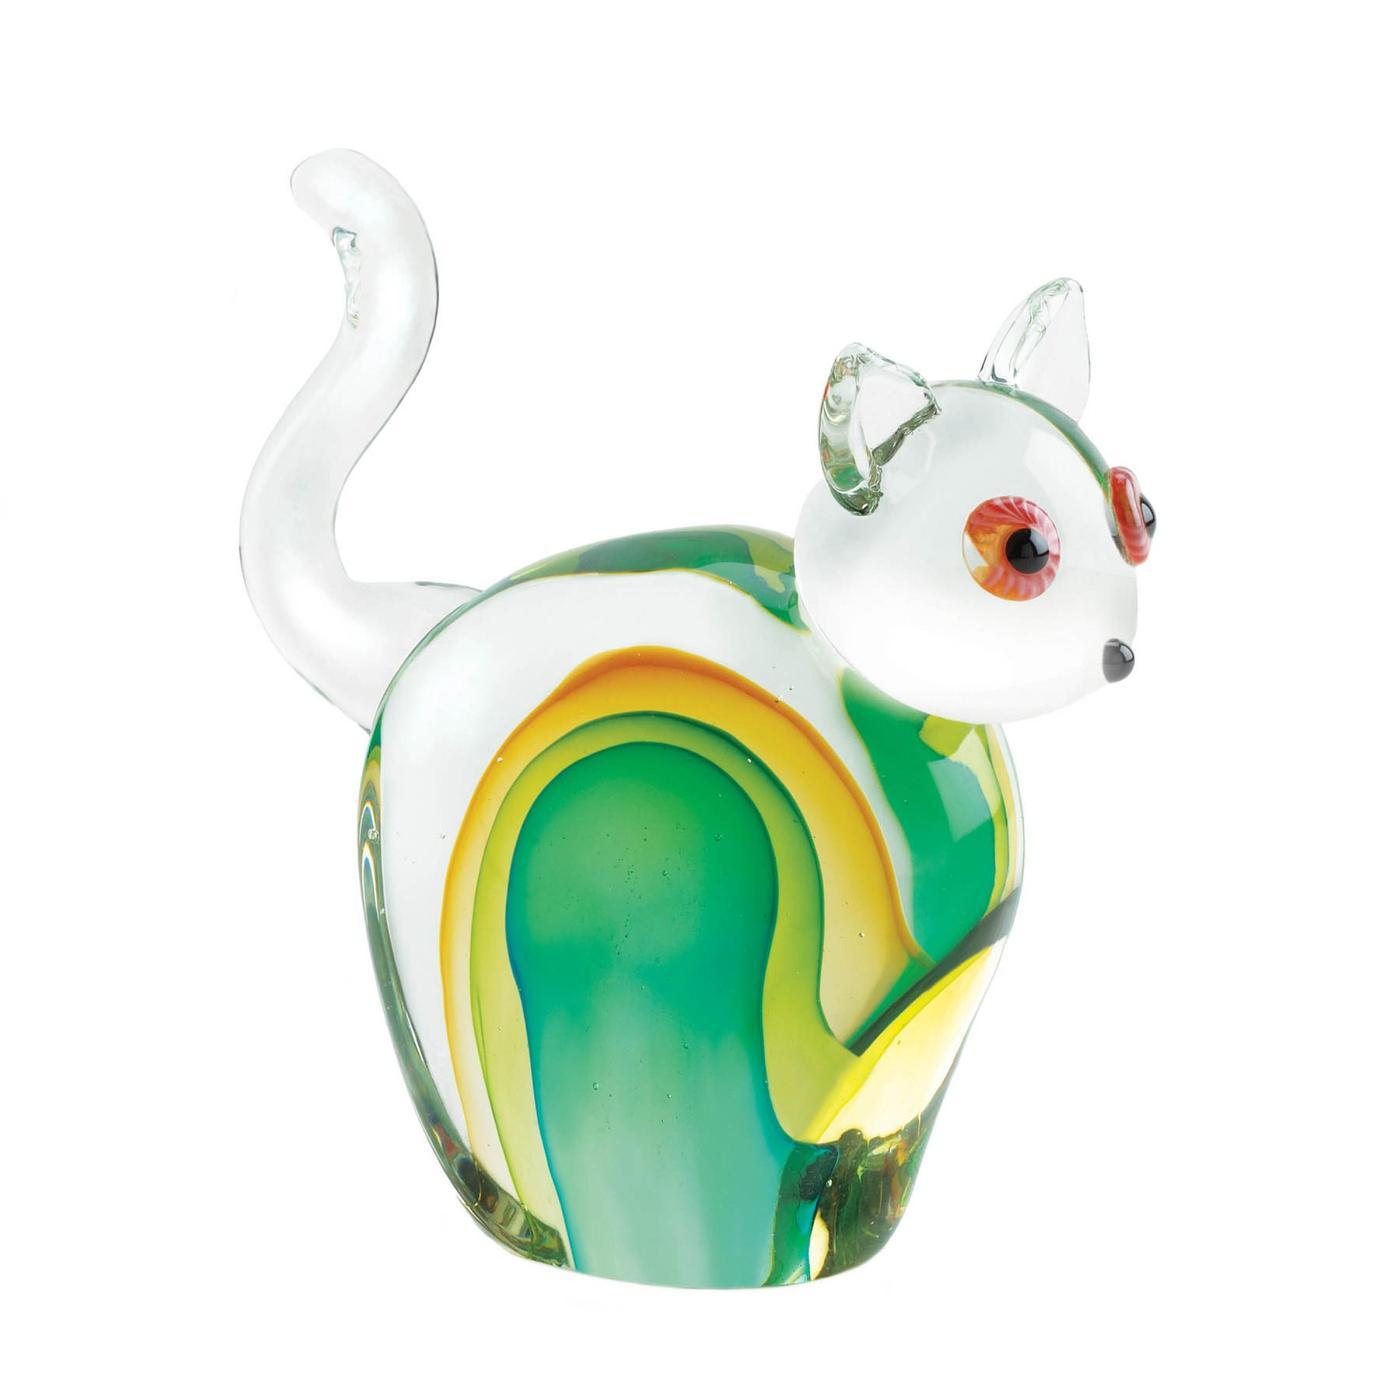 Hand Made Art Glass Decorative Unique Cat Statue Green and Yellow Hues - $49.95